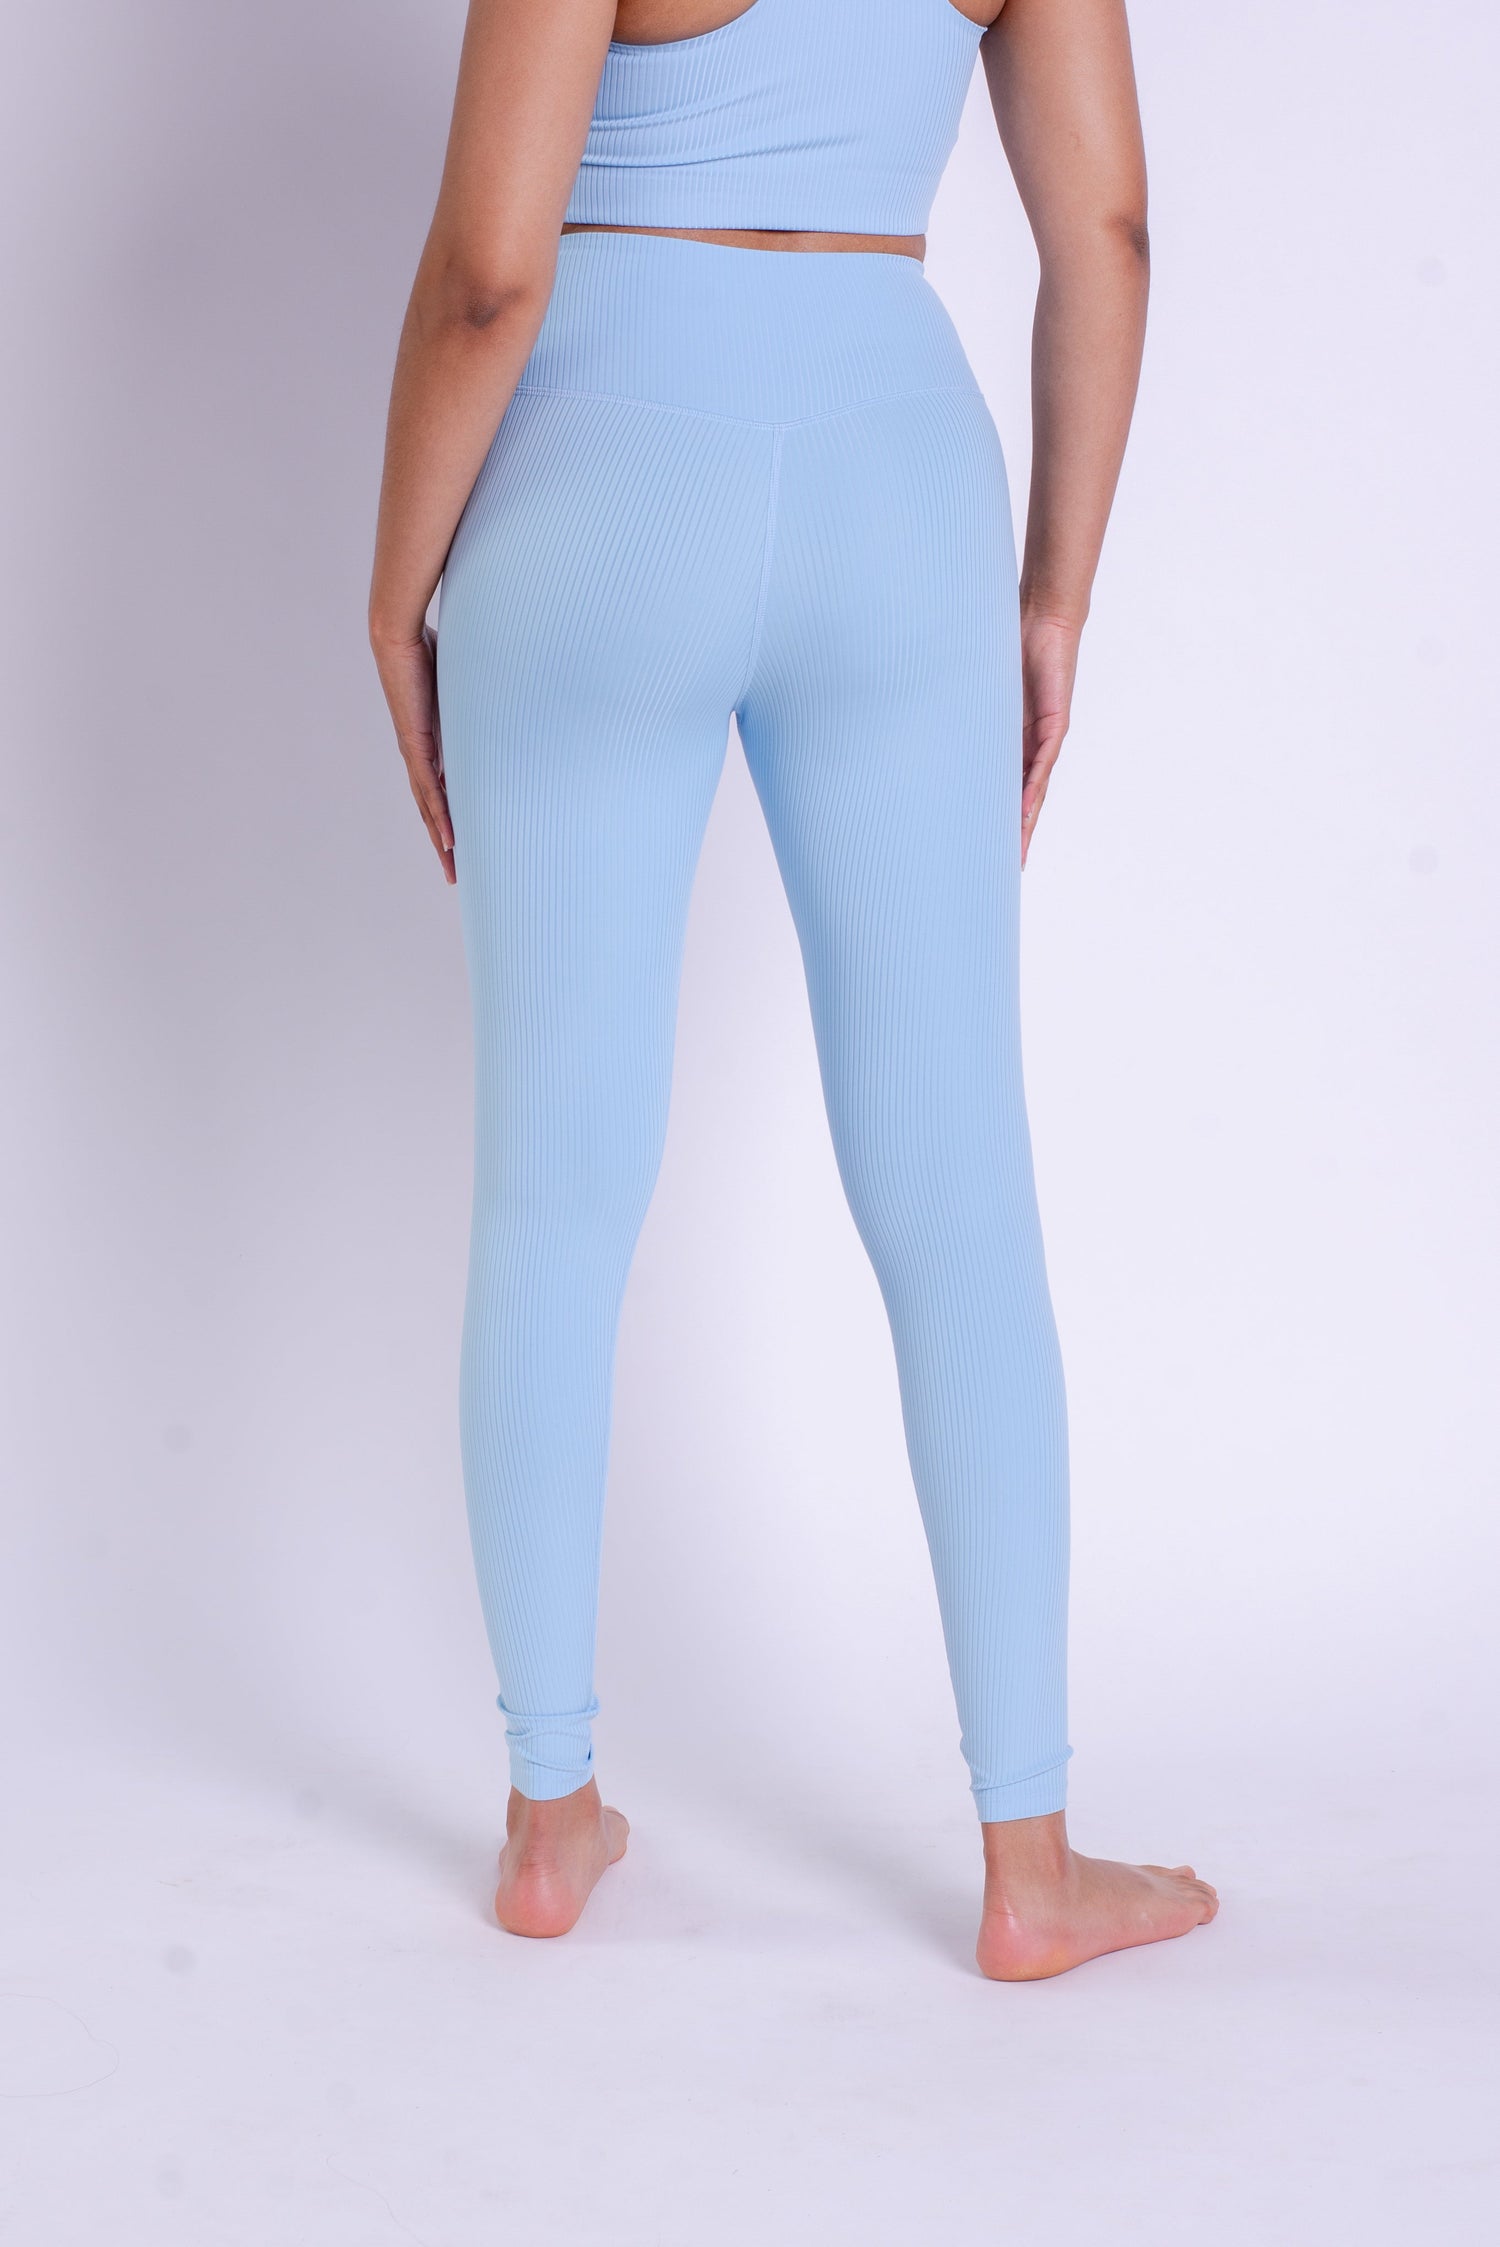 17530- High Waisted Leggings – Trendy Trends Dancewear and Boutique